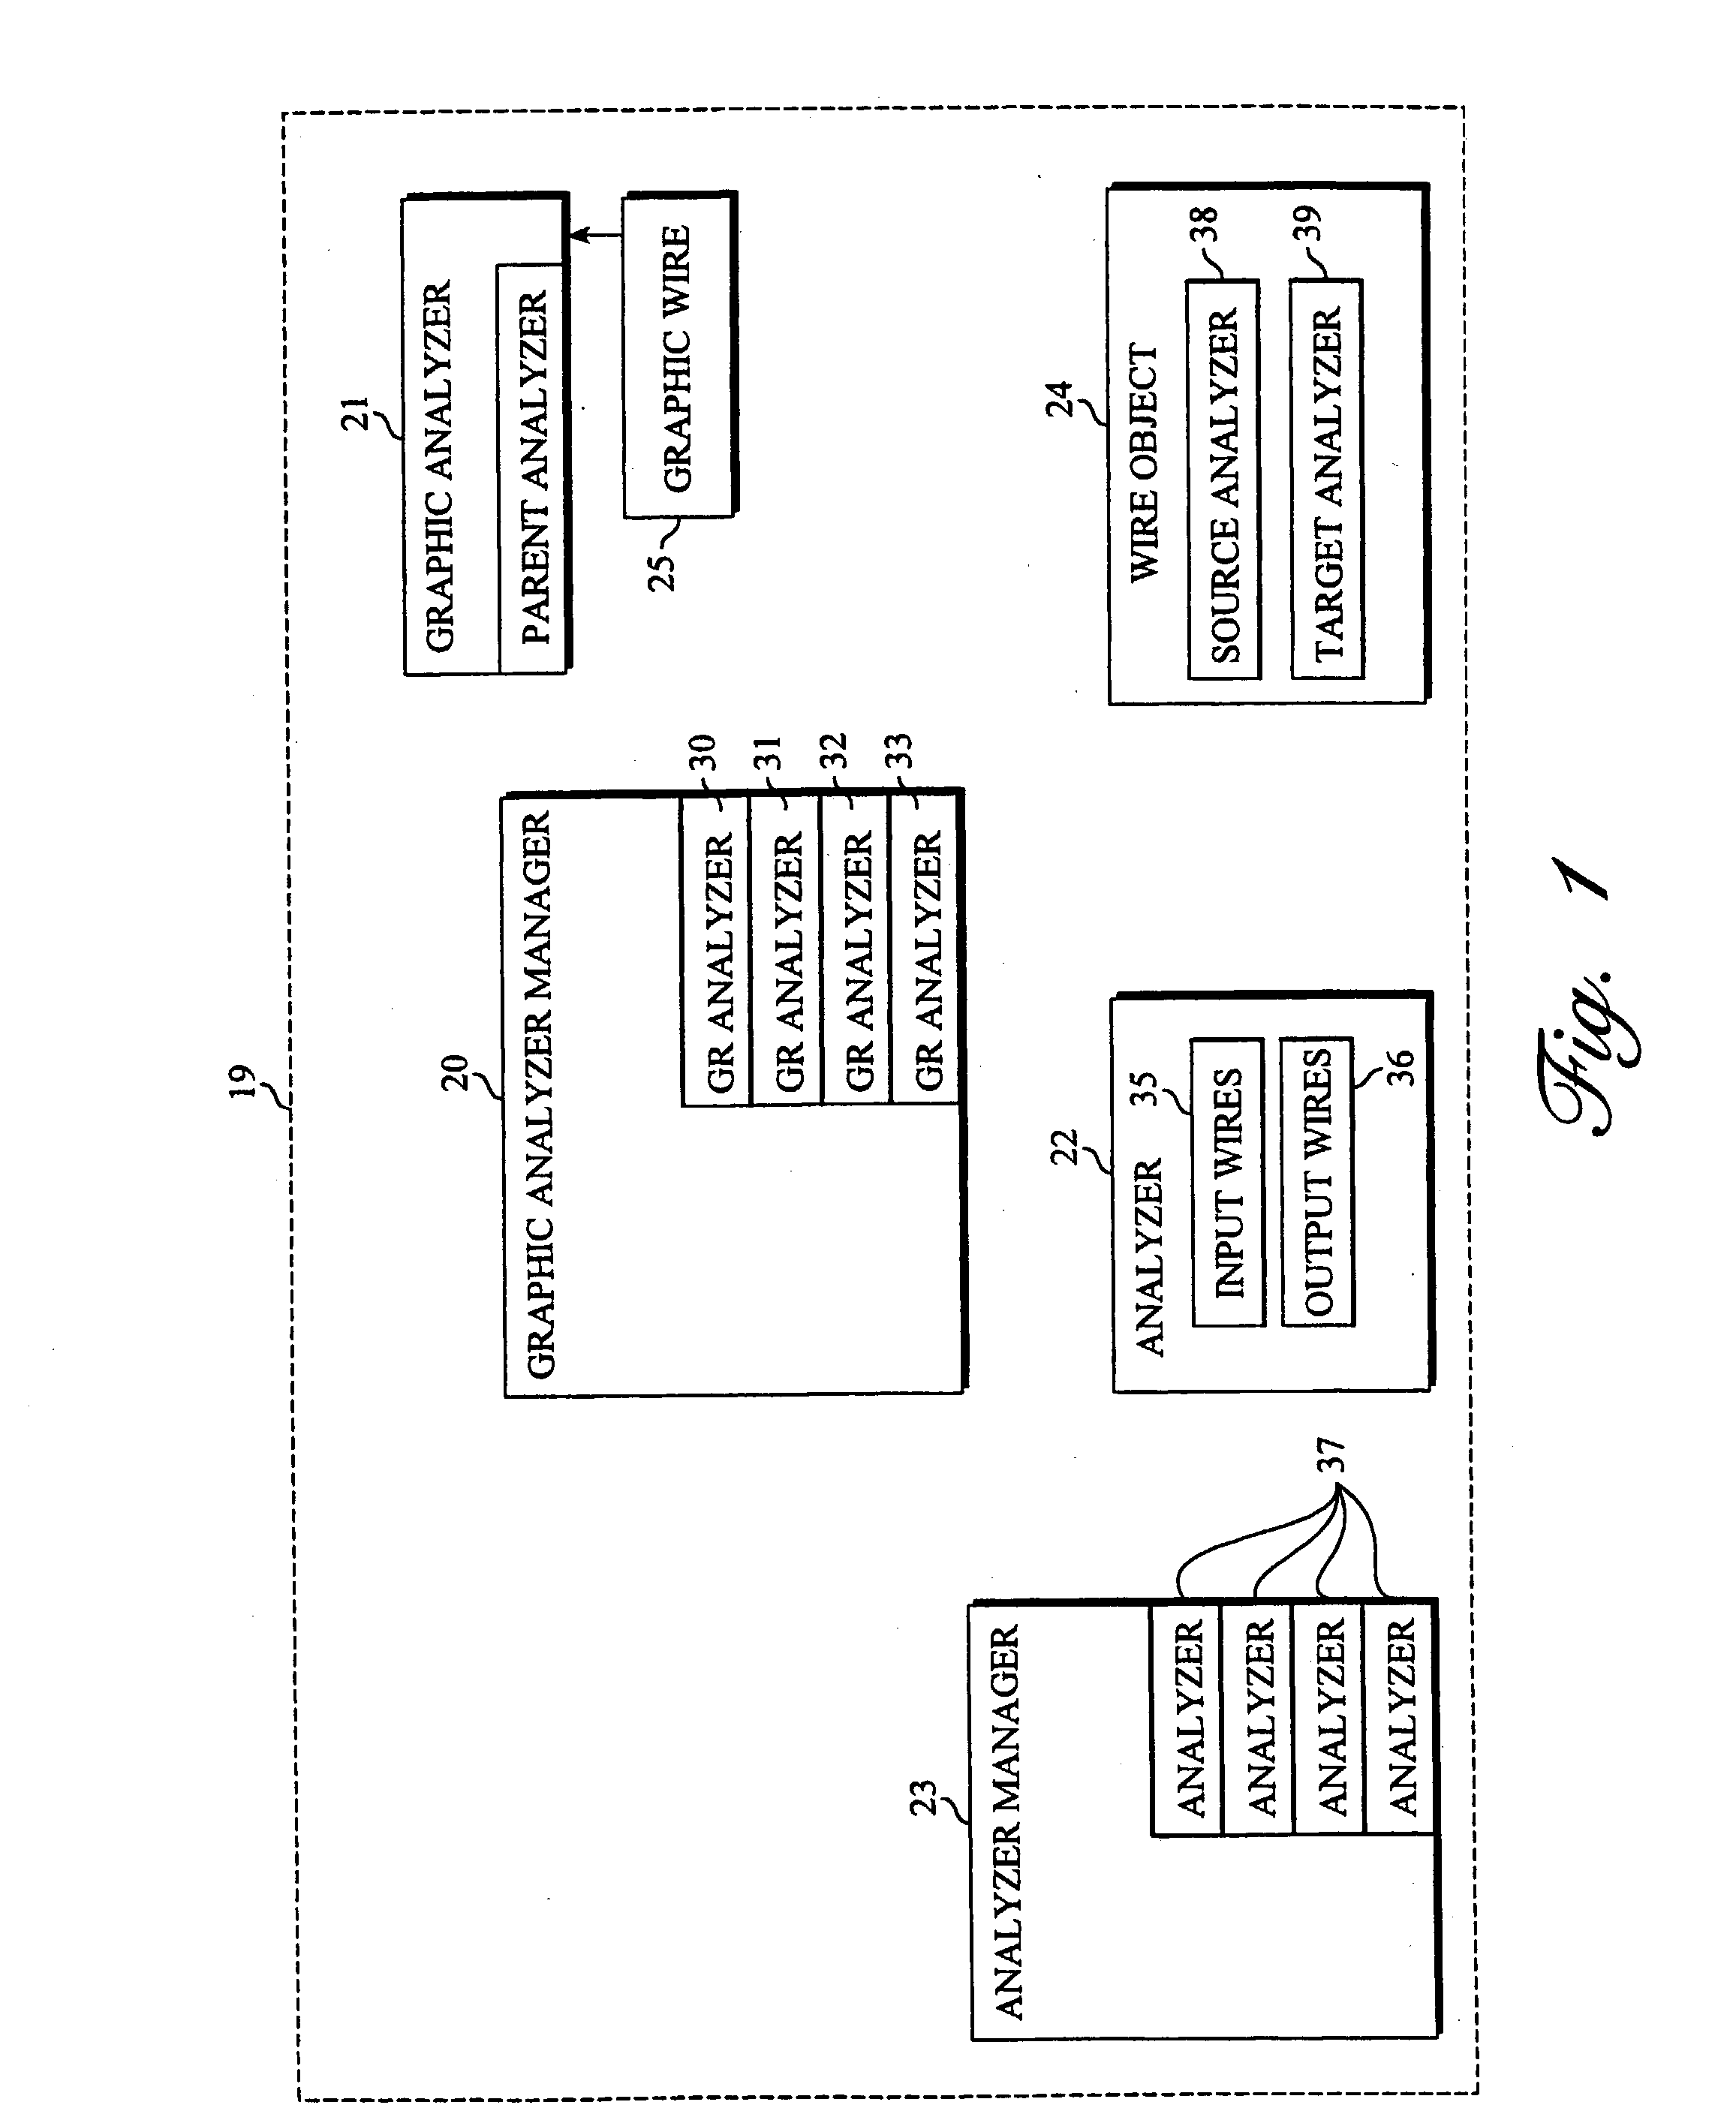 Functional coverage analysis systems and methods for verification test suites